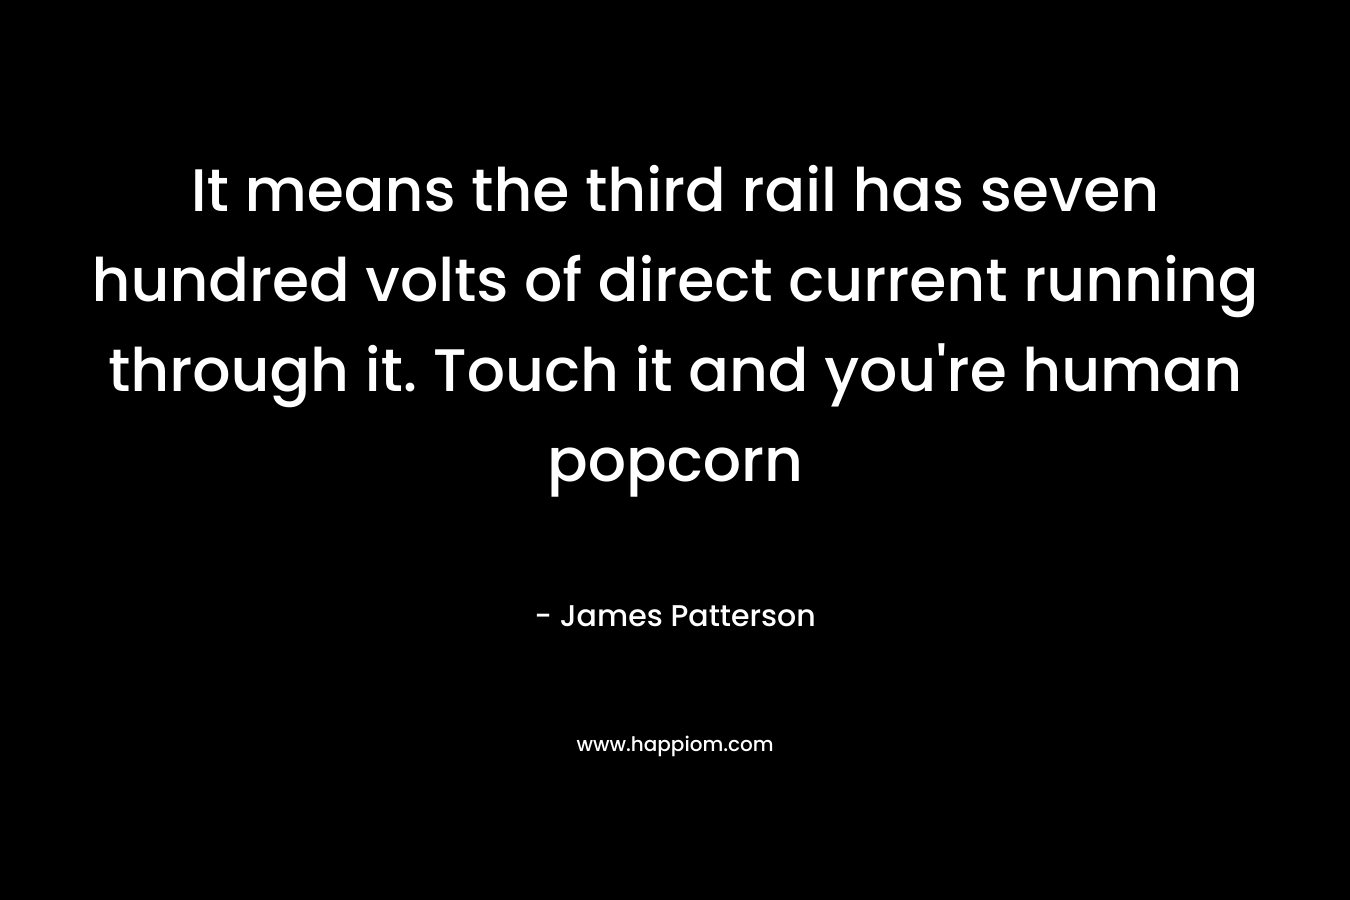 It means the third rail has seven hundred volts of direct current running through it. Touch it and you're human popcorn